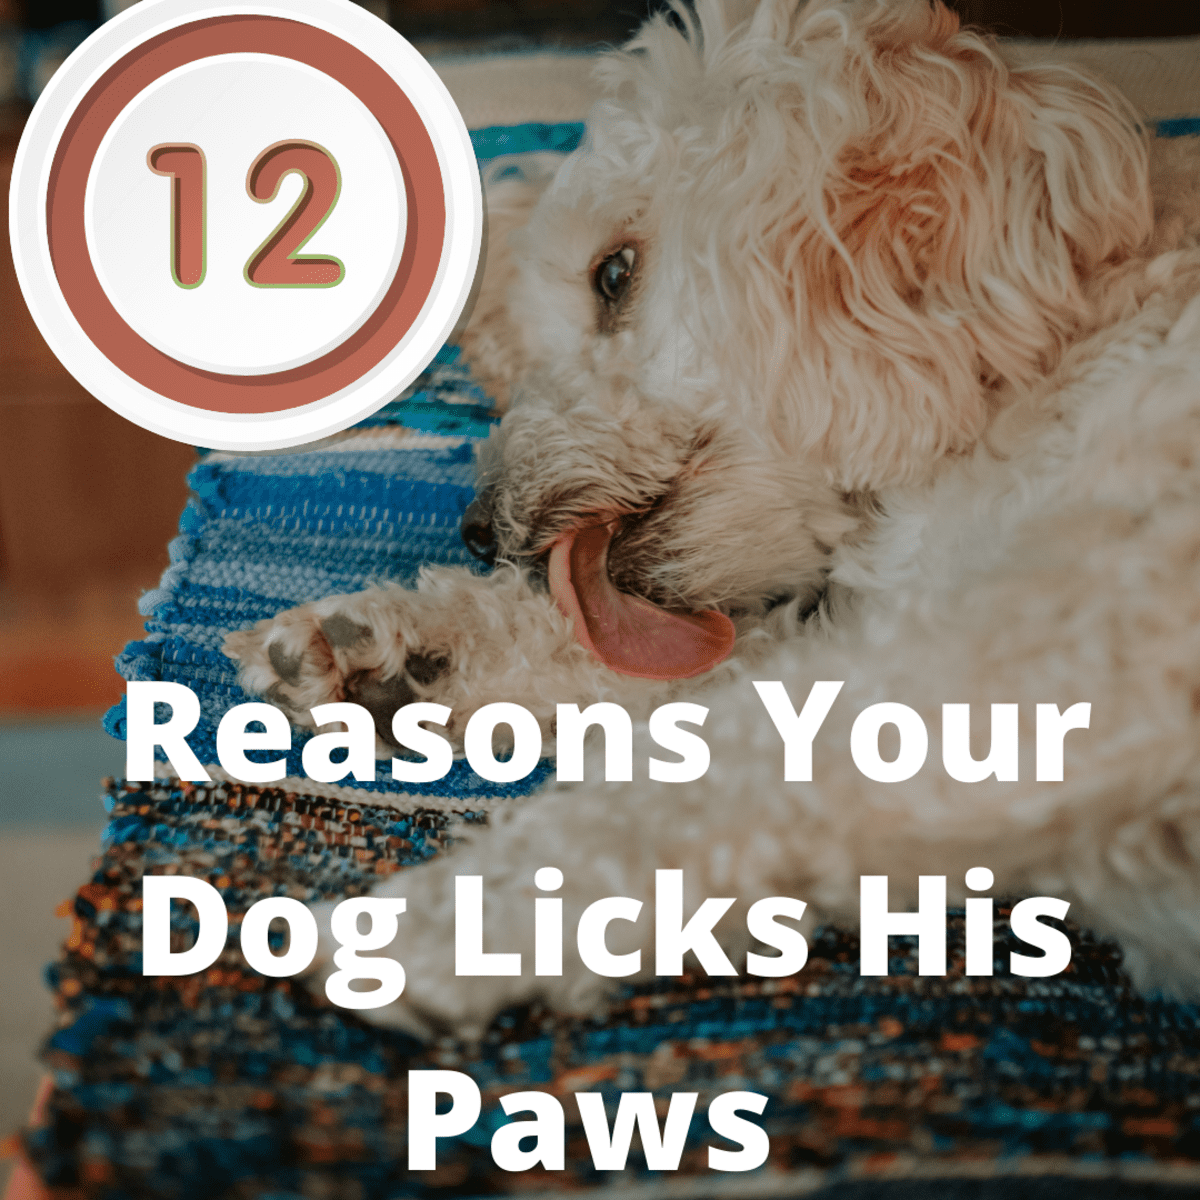 why does my puppy bite and lick me